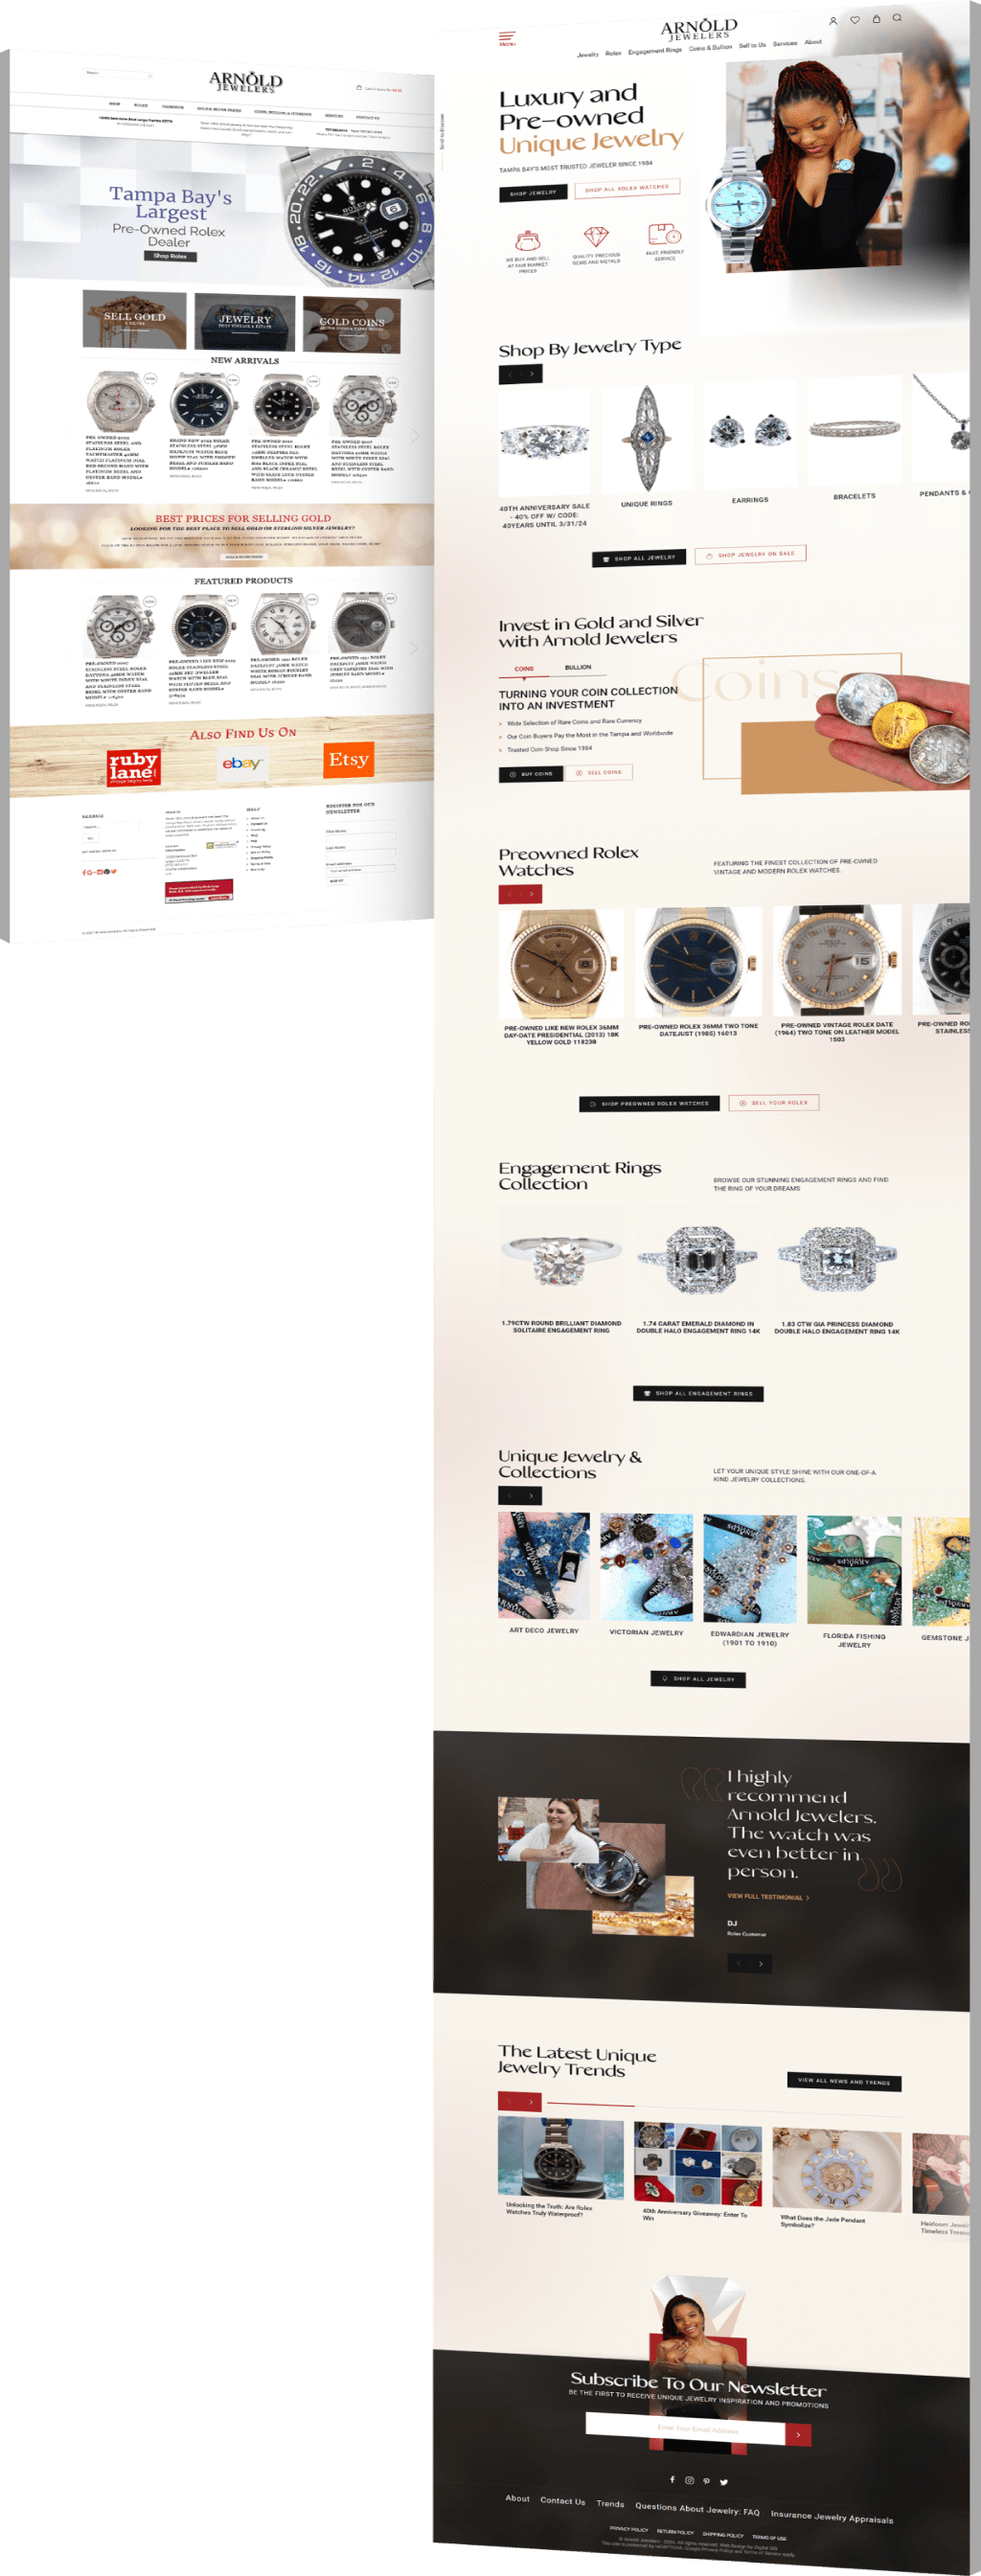 Before and after screenshots of Arnold Jeweler's website design